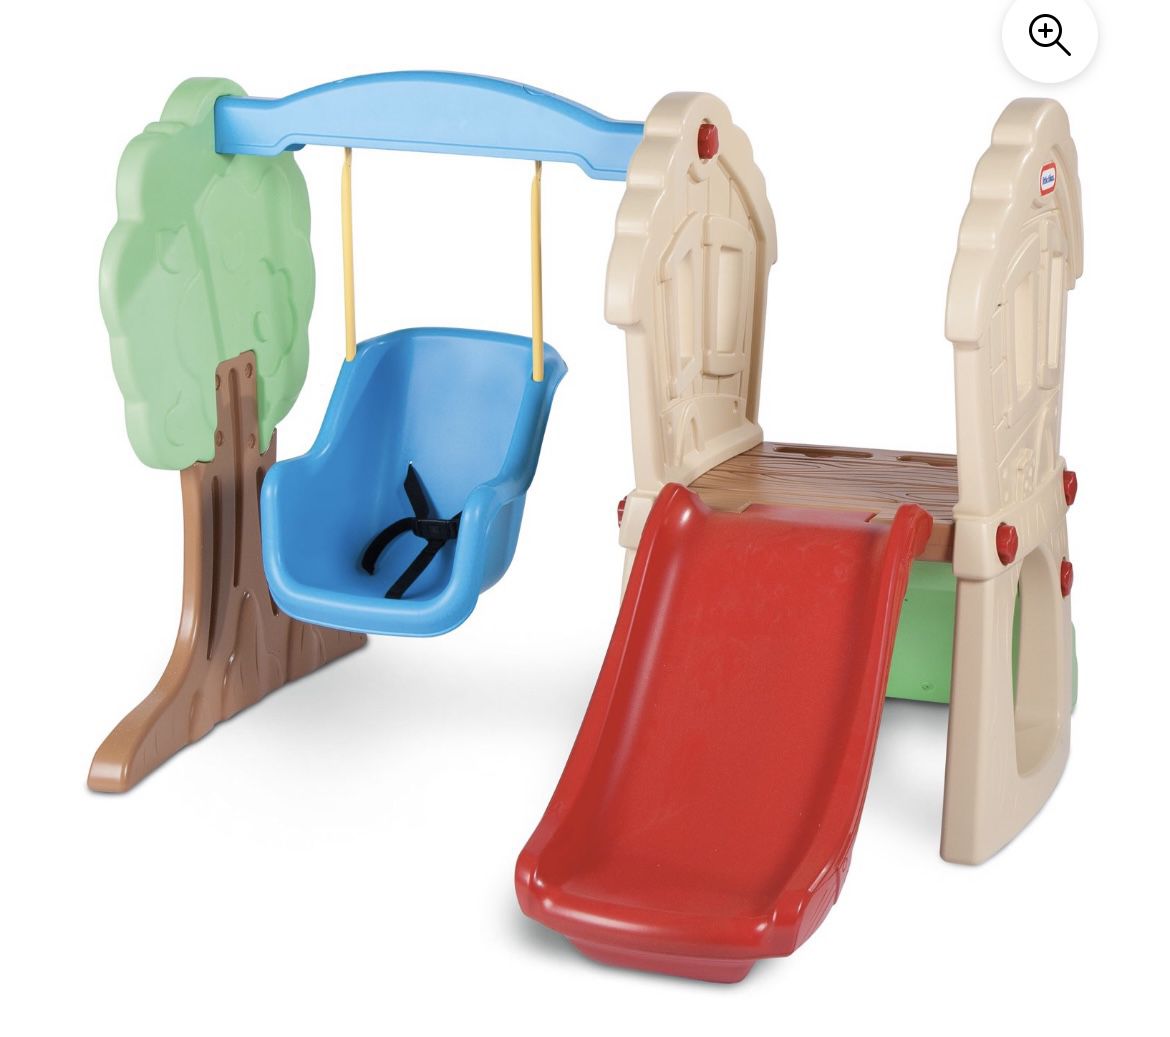 Little Tikes Hide and Seek Climber and Swing Set